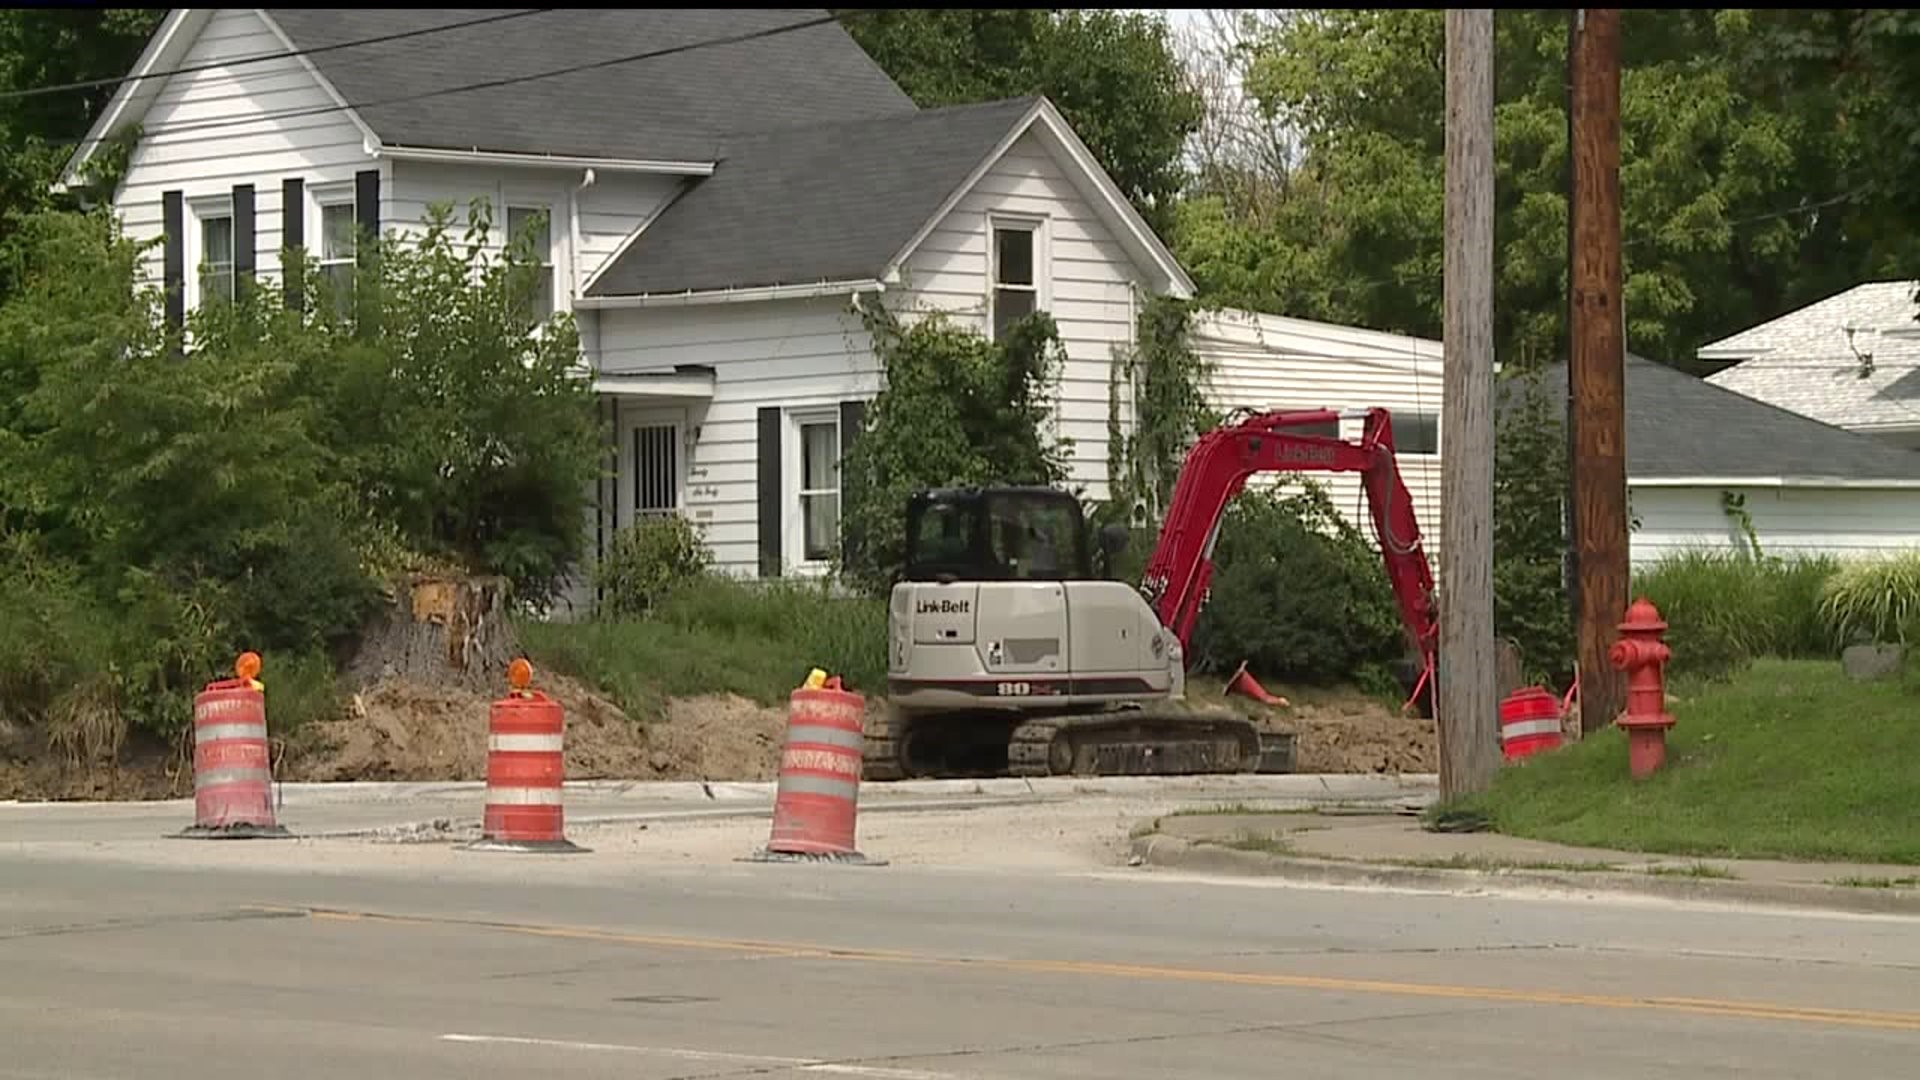 Construction worker in Moline dies after being hit by truck backing up